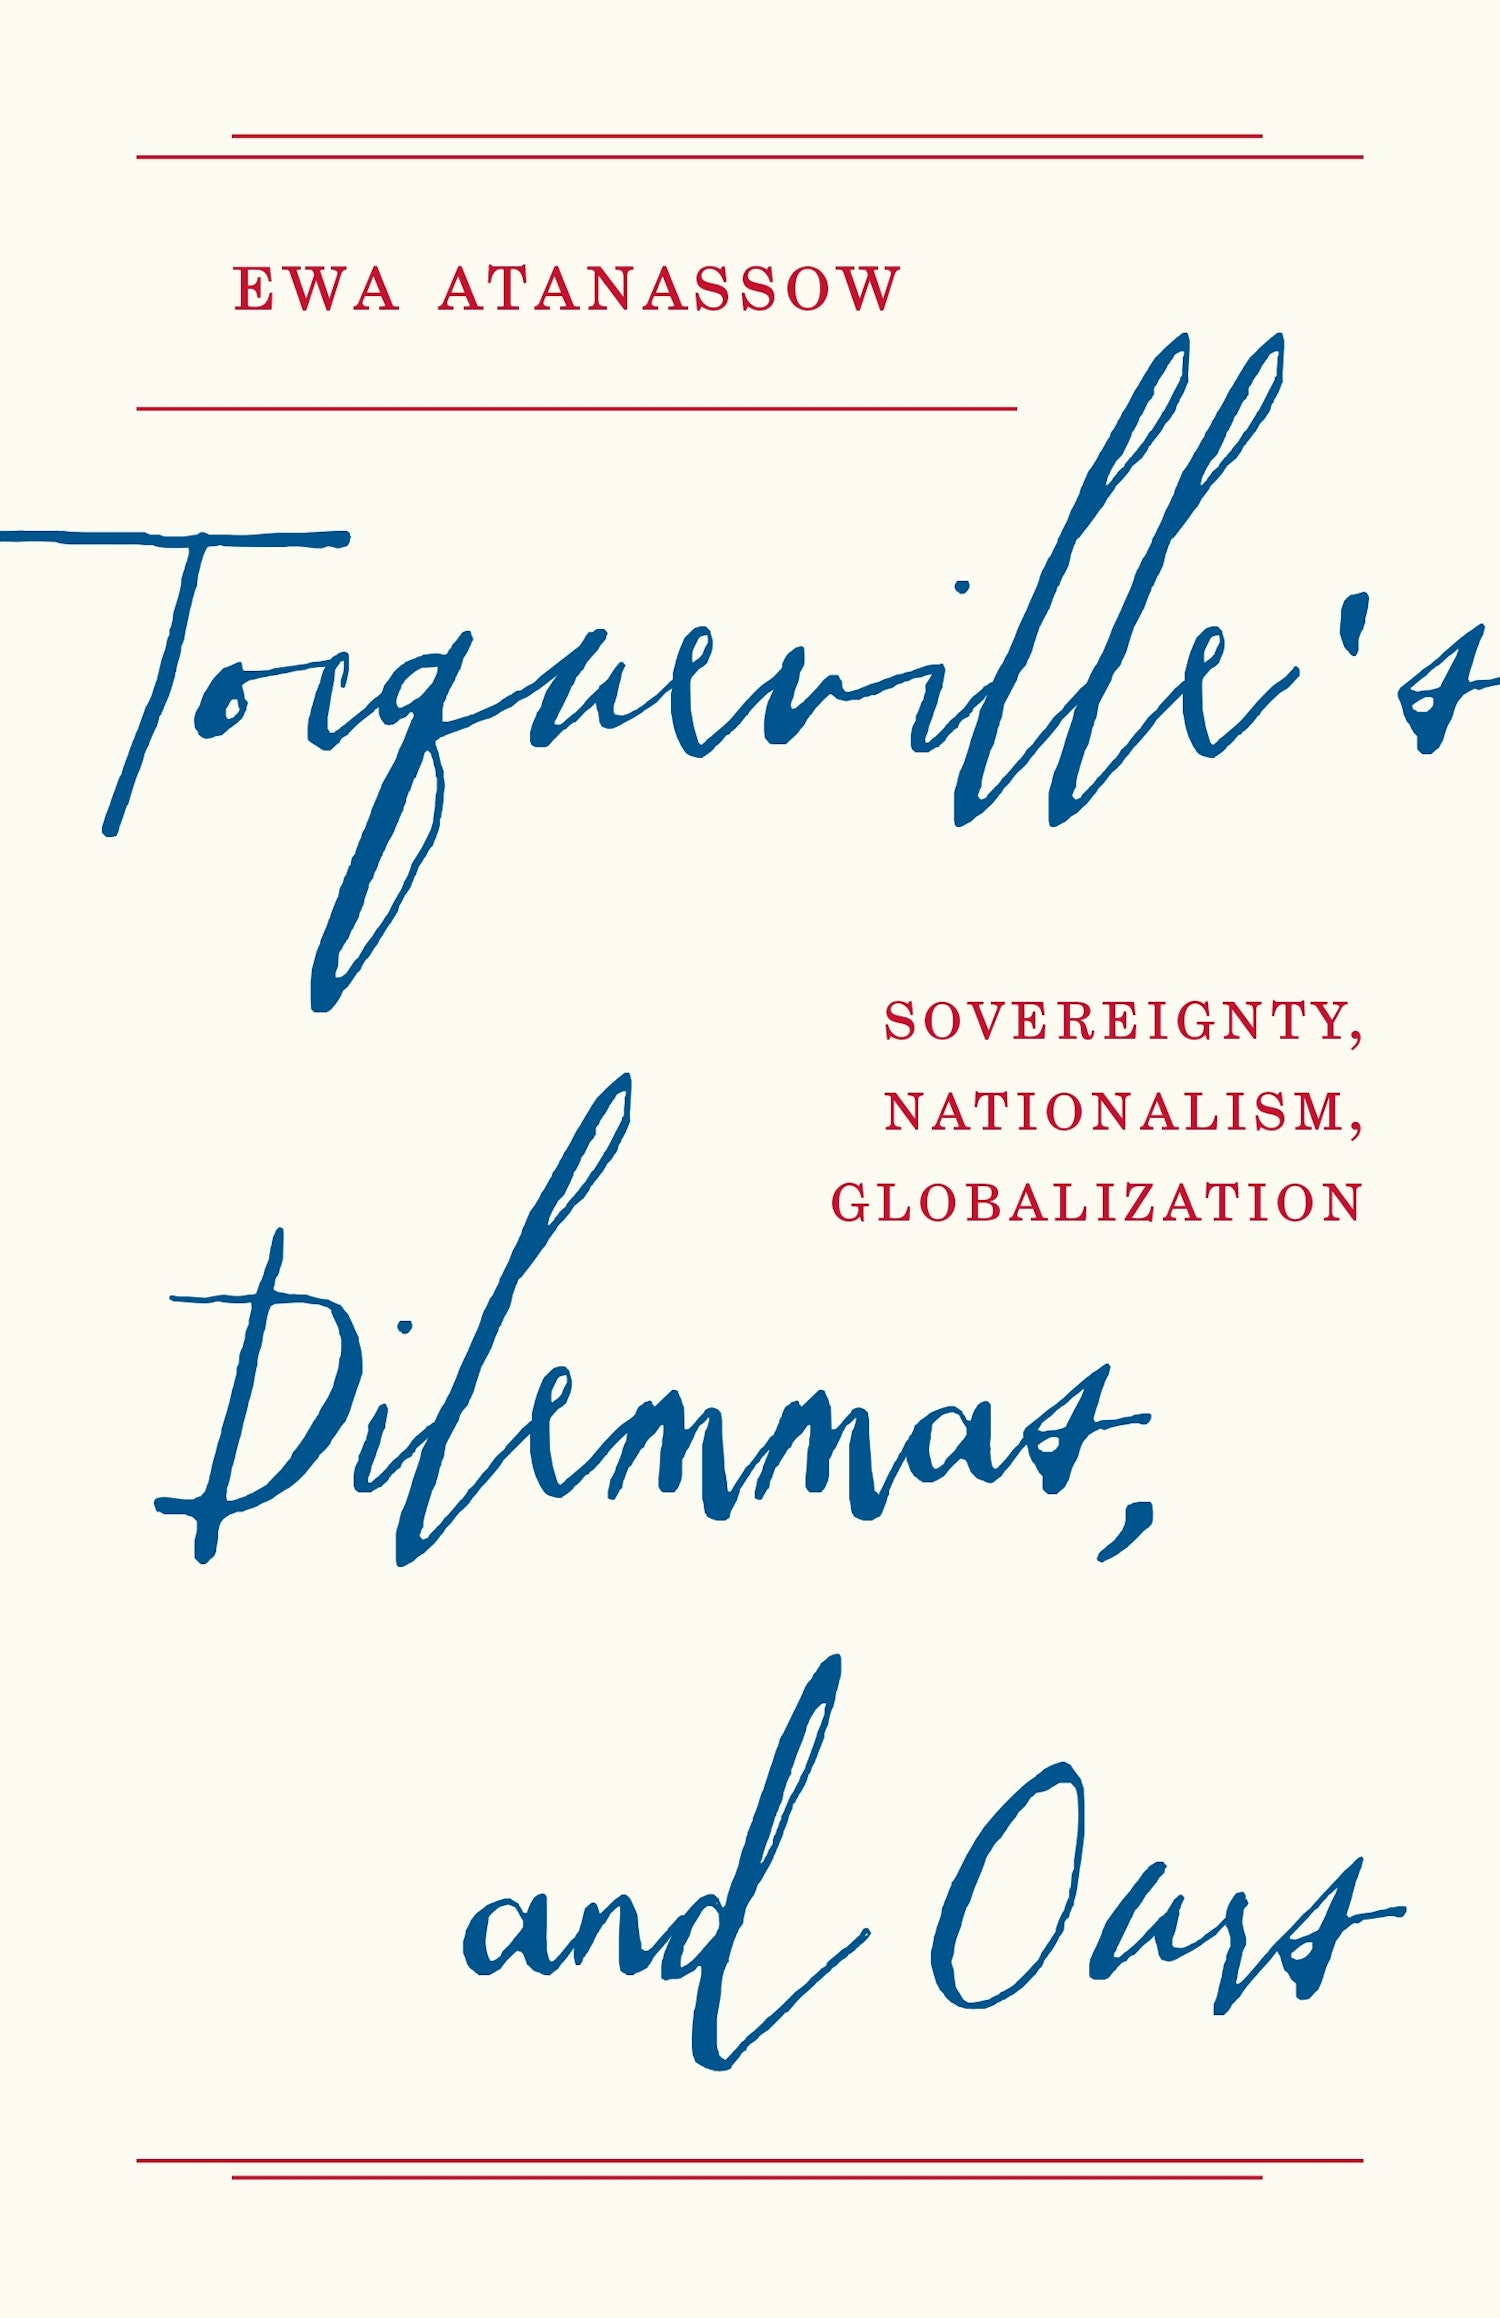 Cover page from Ewa Atanassow's Book Tocqueville’s Dilemmas, and Ours 